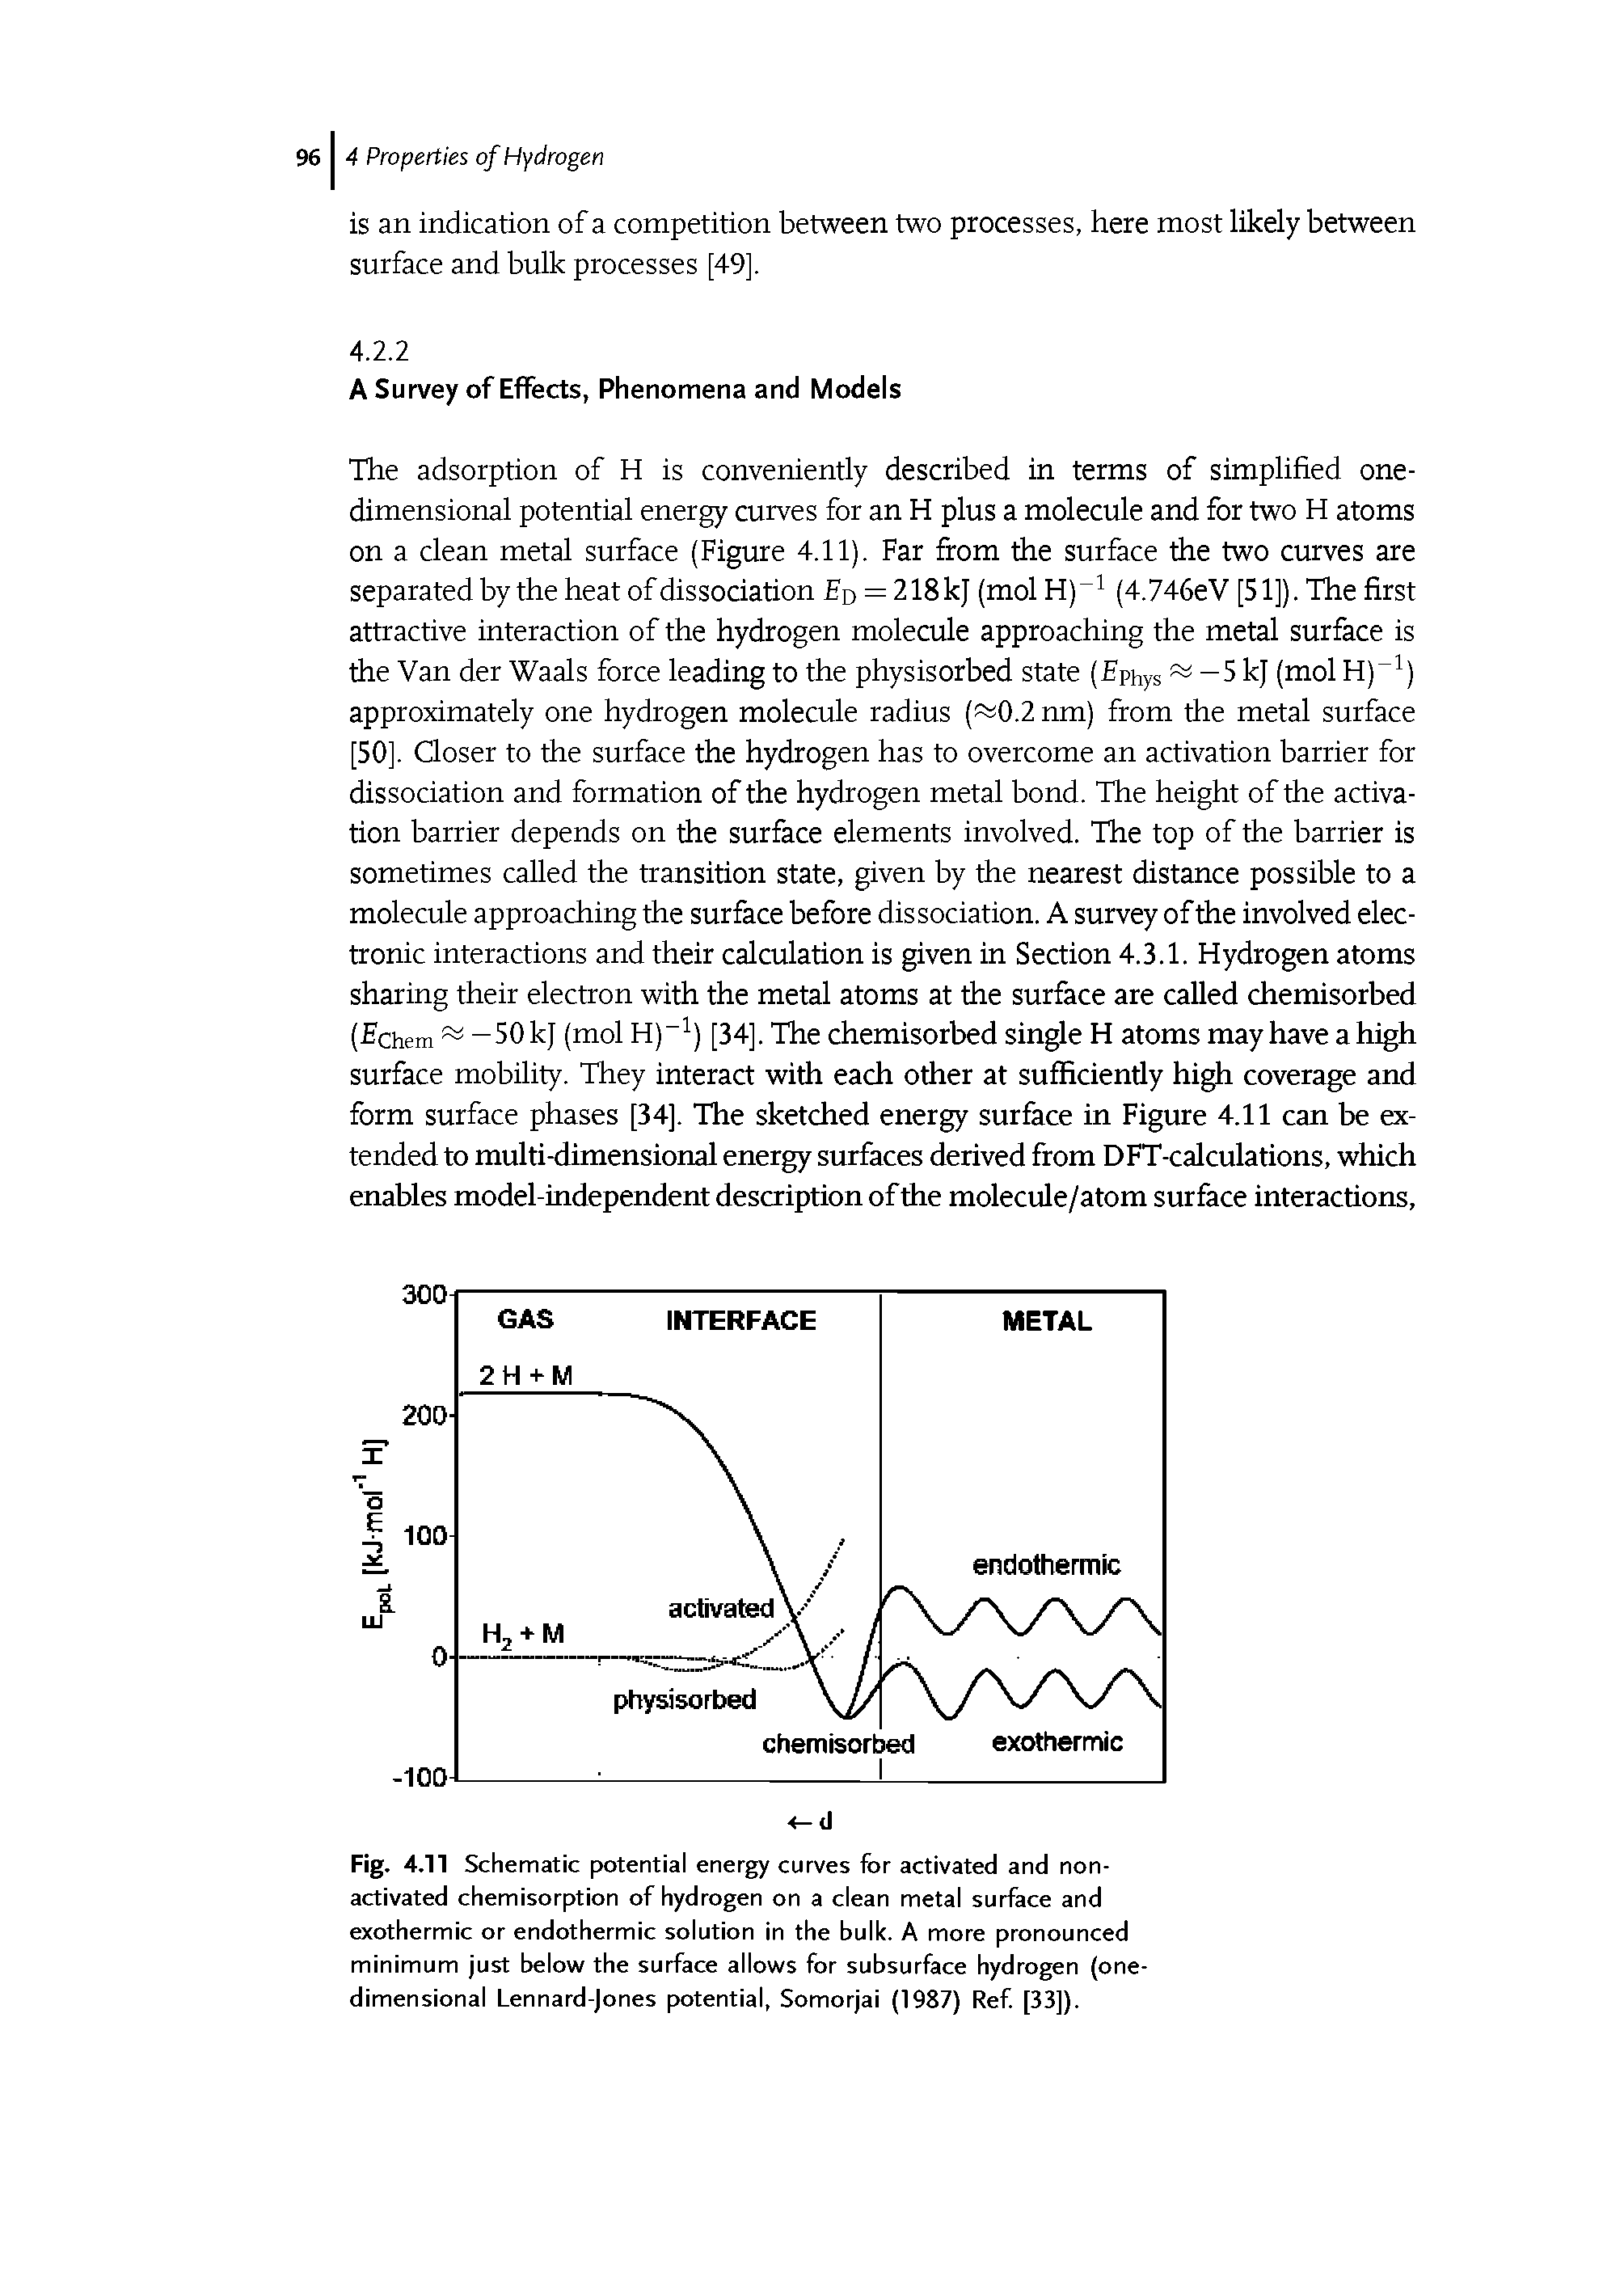 Fig. 4.11 Schematic potential energy curves for activated and non-activated chemisorption of hydrogen on a clean metal surface and exothermic or endothermic solution in the bulk. A more pronounced minimum just below the surface allows for subsurface hydrogen (onedimensional Lennard-Jones potential, Somorjai (1987) Ref [33]).